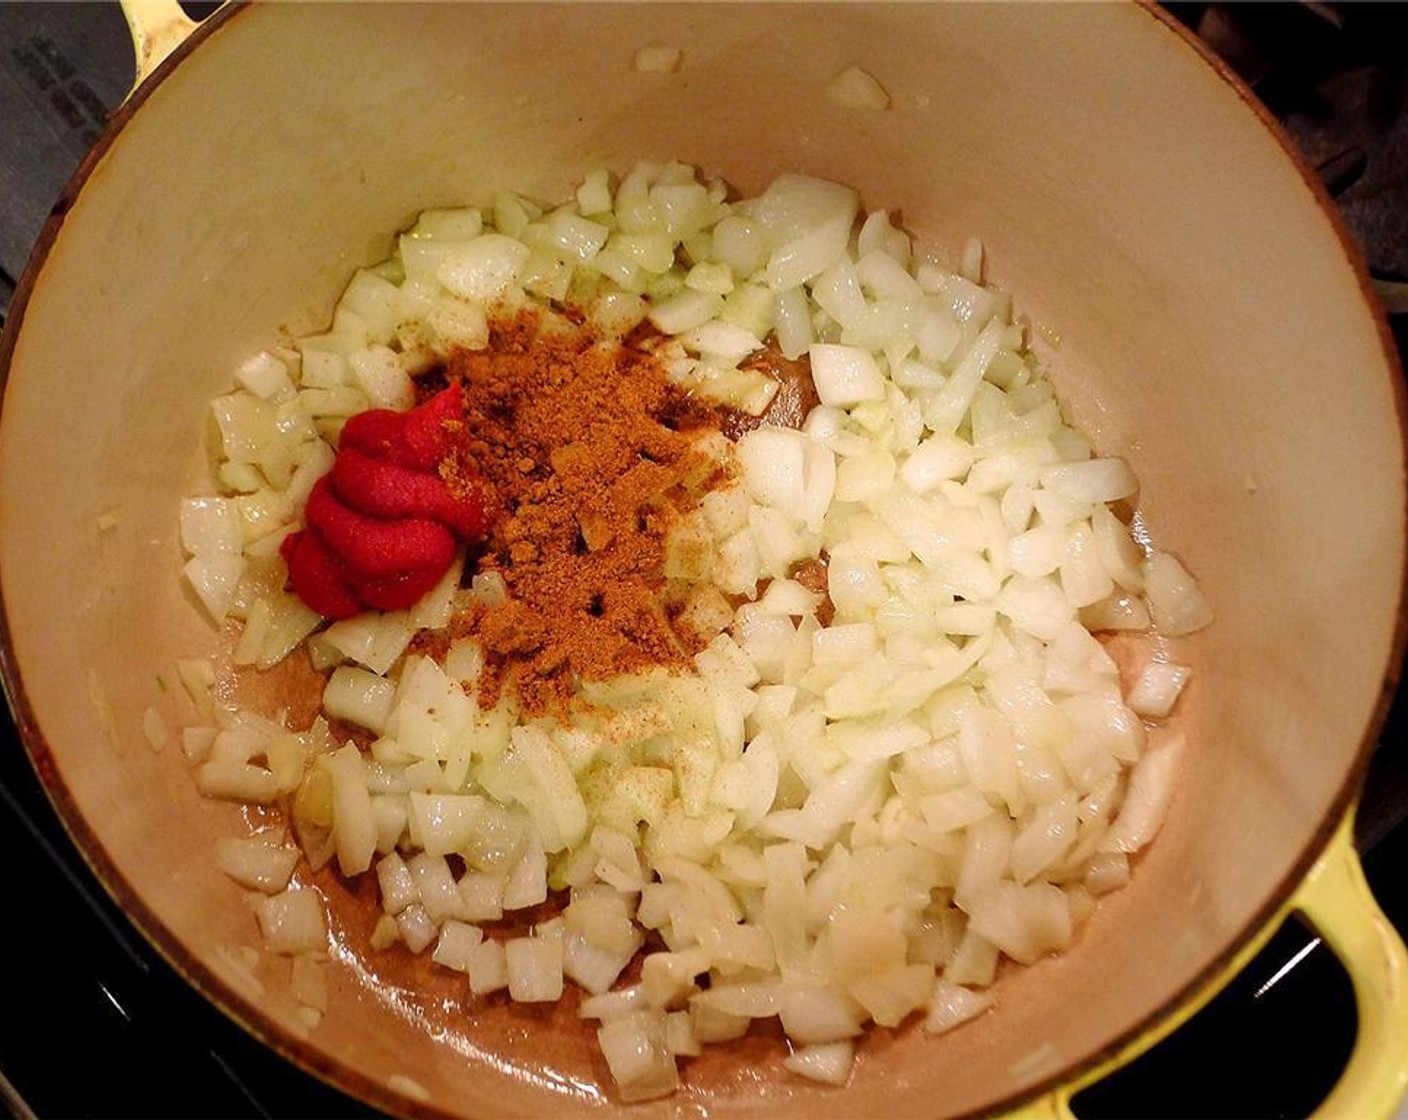 step 2 Add the Ground Cumin (1 tsp) and Tomato Purée (1 Tbsp) and cook for another 2 minutes.